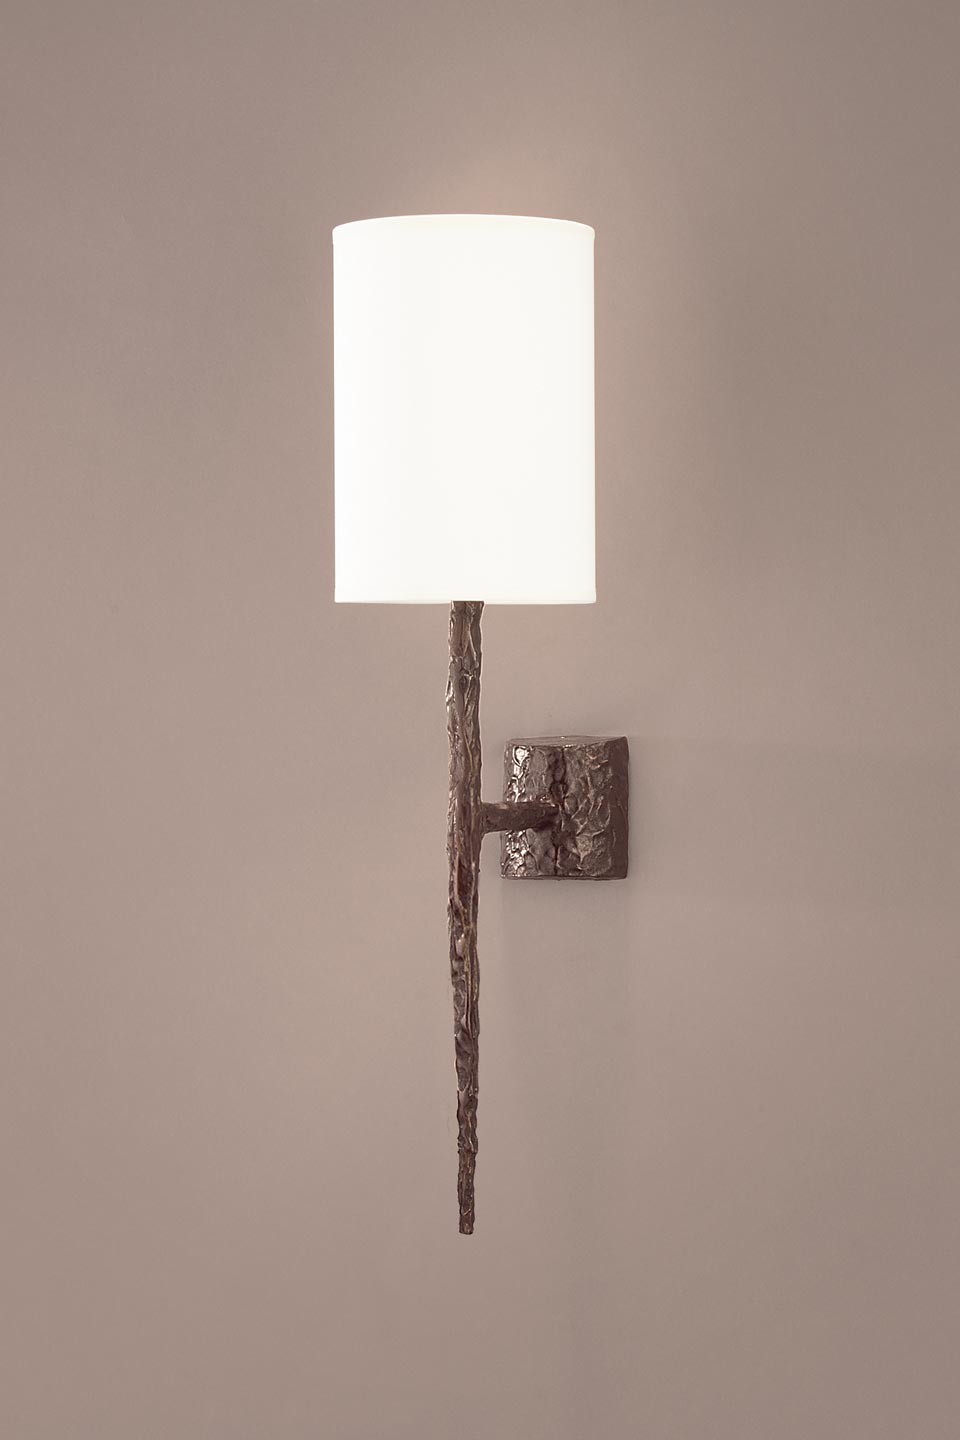 Hera short wall lamp in black patinated bronze. Objet insolite. 